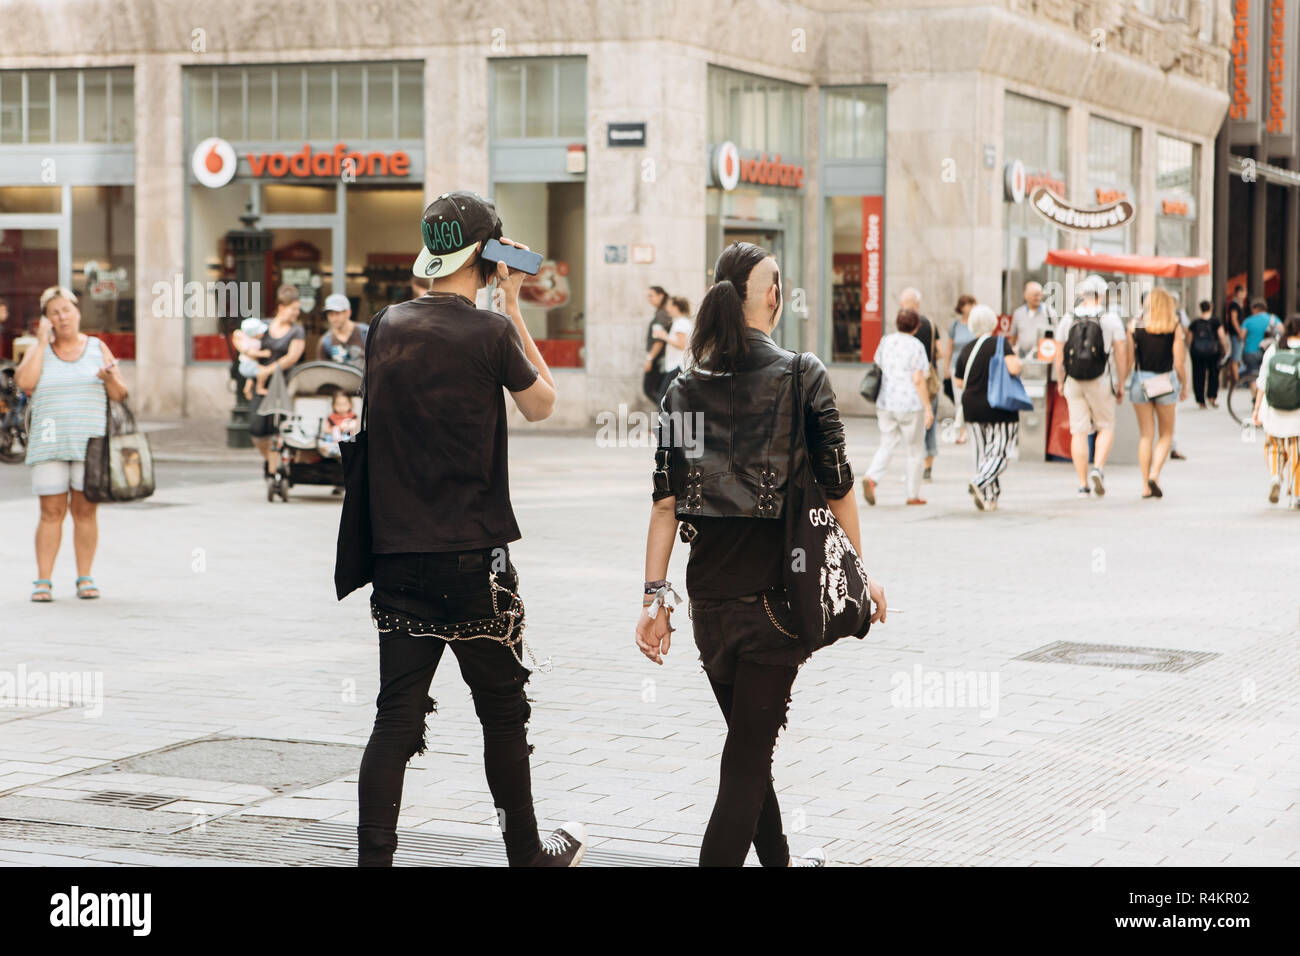 Germany, Leipzig, September 6, 2018: Young couple punks or friends walking down the street in Leipzig. He listens to music on the phone. Youth subculture. Stock Photo